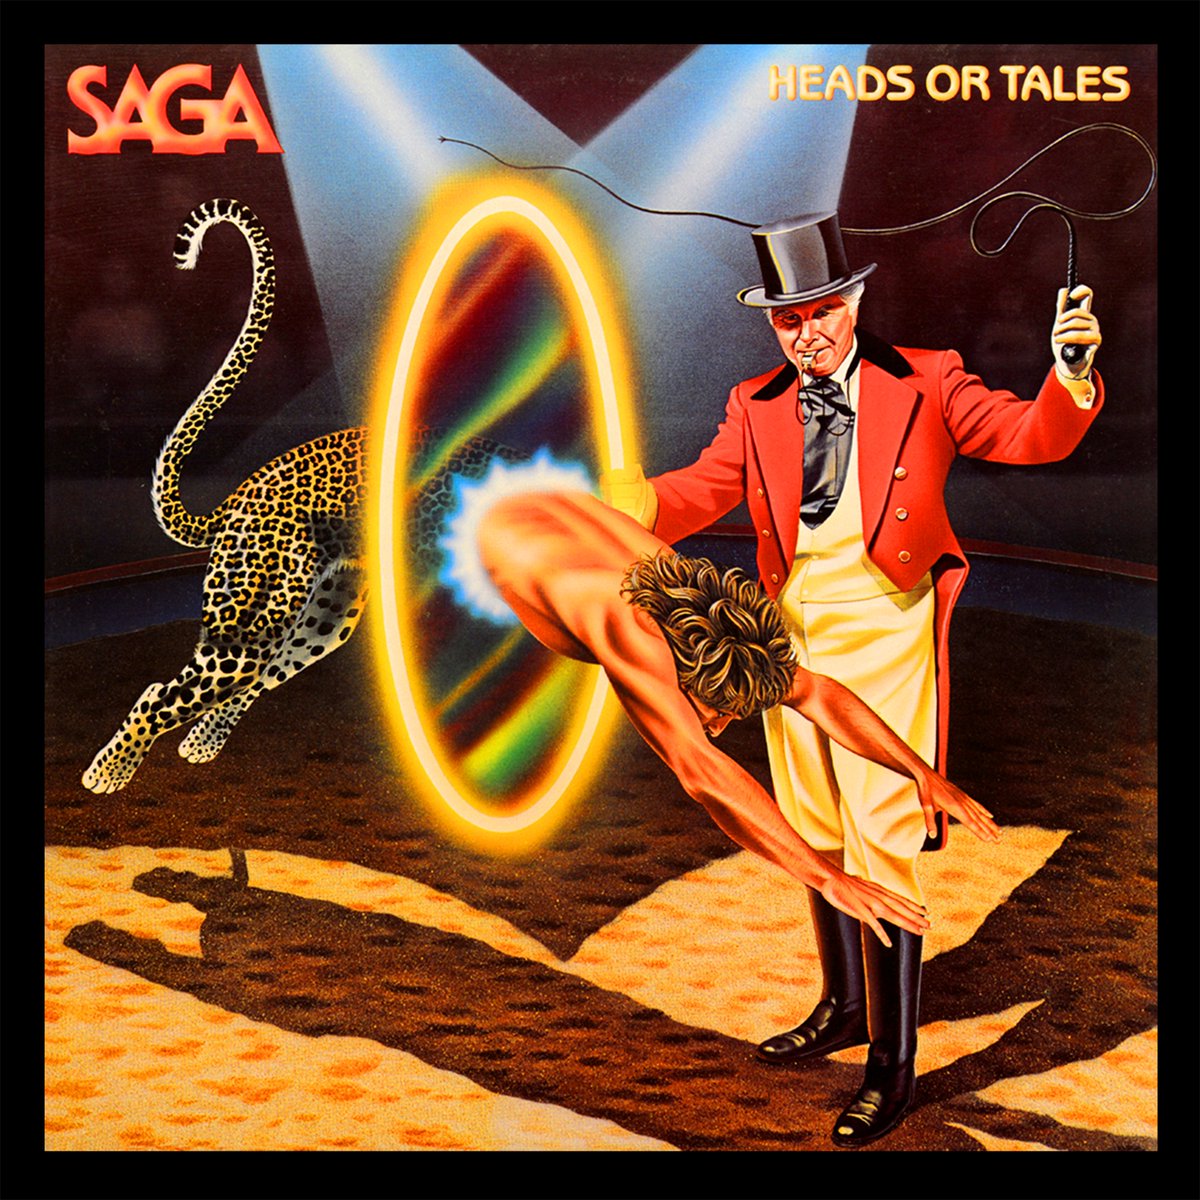 Discovering #SAGA      HEADS OR TALES  1983

The band's 5th studio album - it's the 2nd album produced by the late Rupert Hine RIP

#TheFlyer #CatWalk #ScratchingTheSurface

Engineers #StephenTayler 
#AndrewScarth #LarryWilliams

Art  #StephenDurke #JudithSalavetz #SpencerDrate